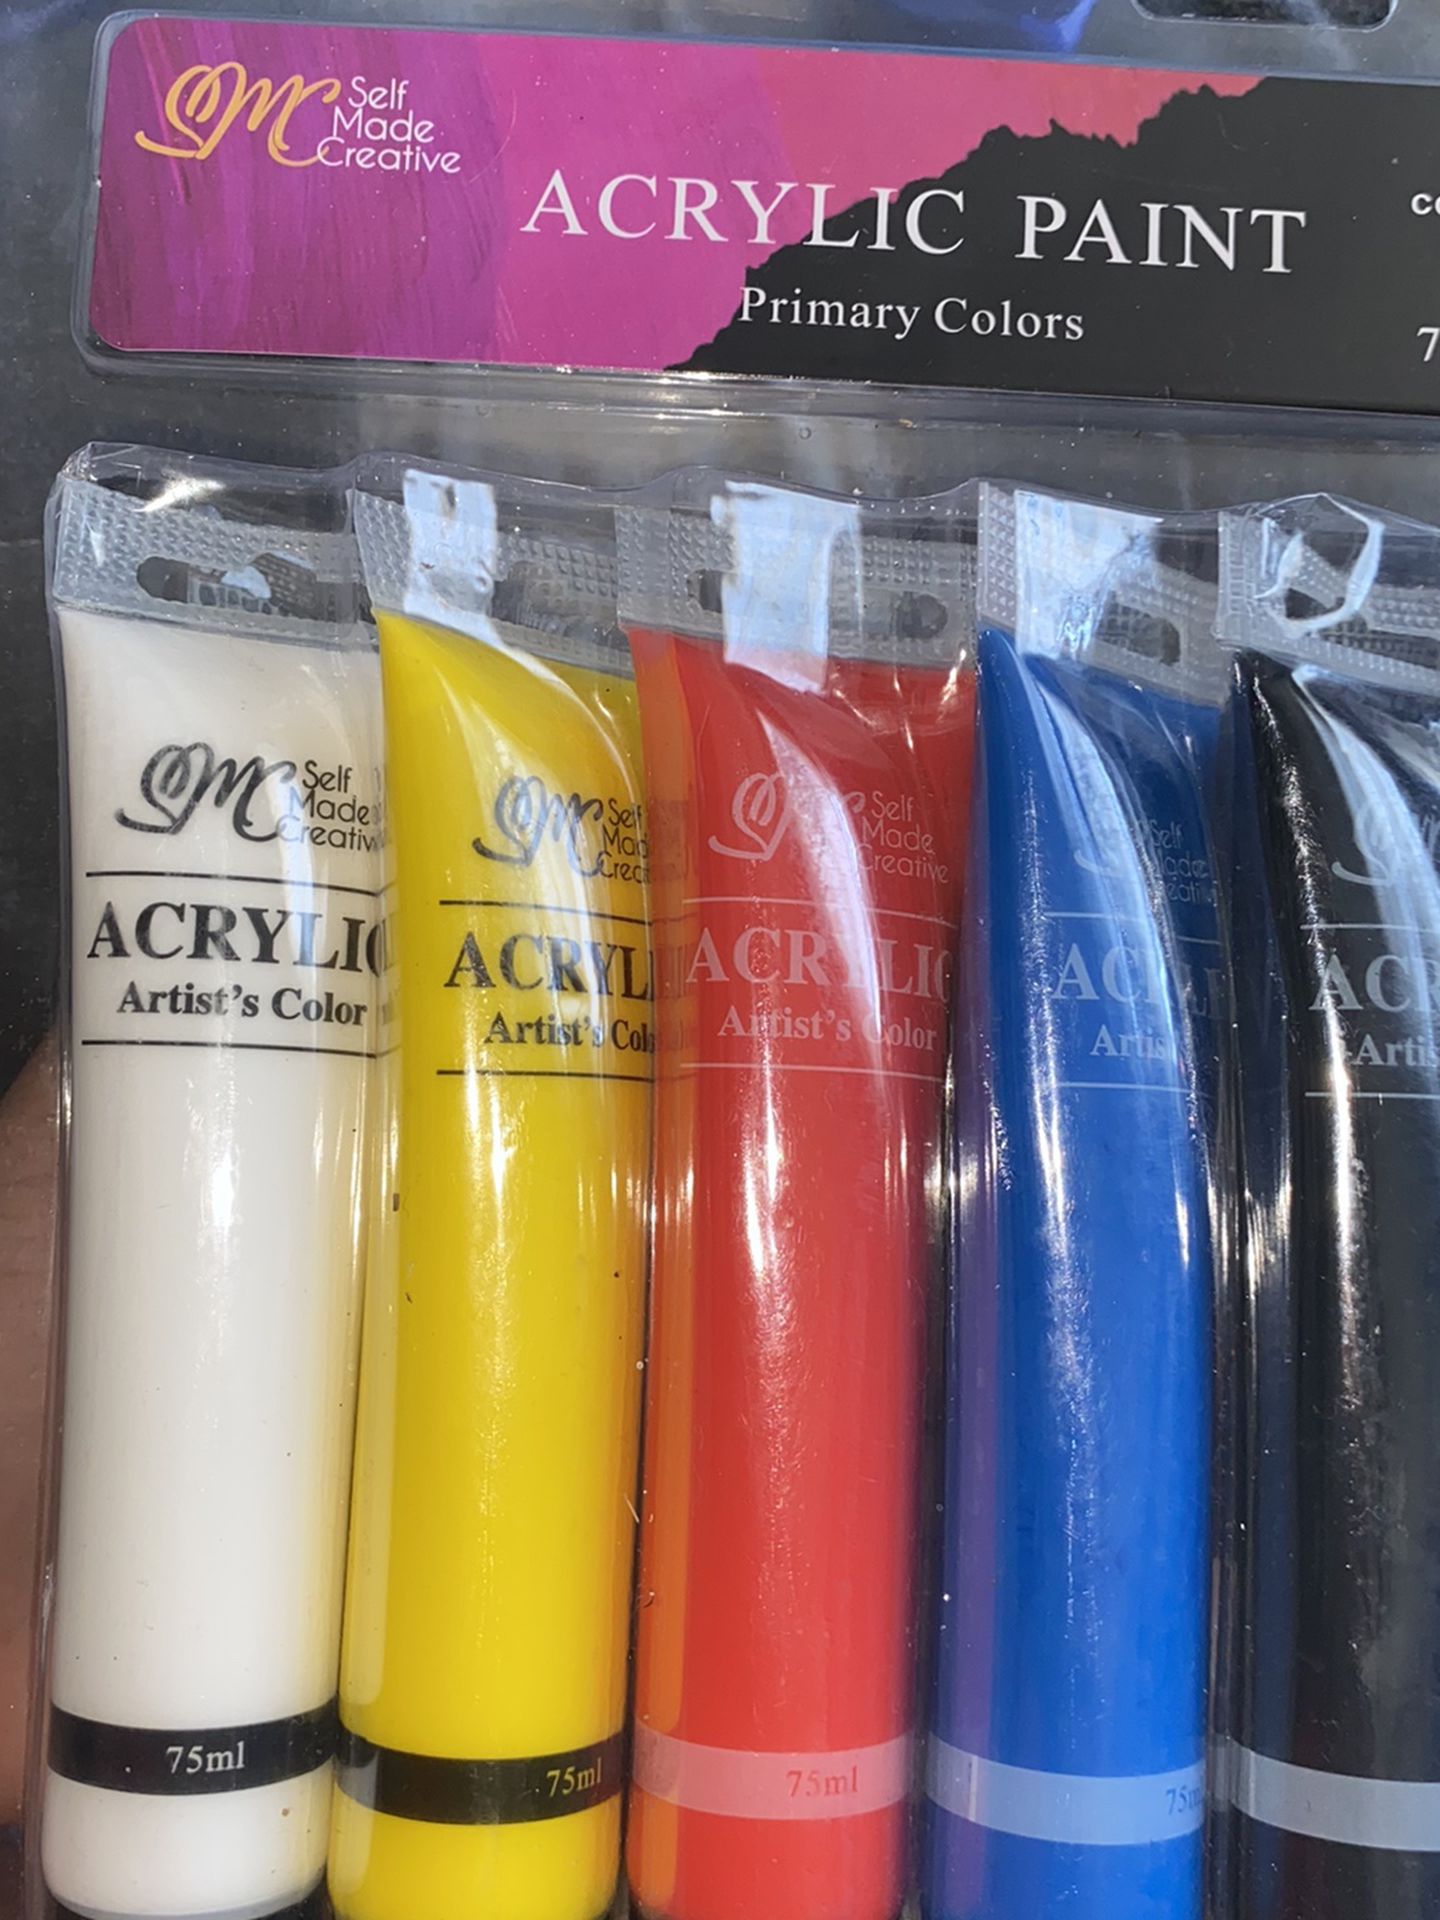 Primary Colors Acrylic Paint